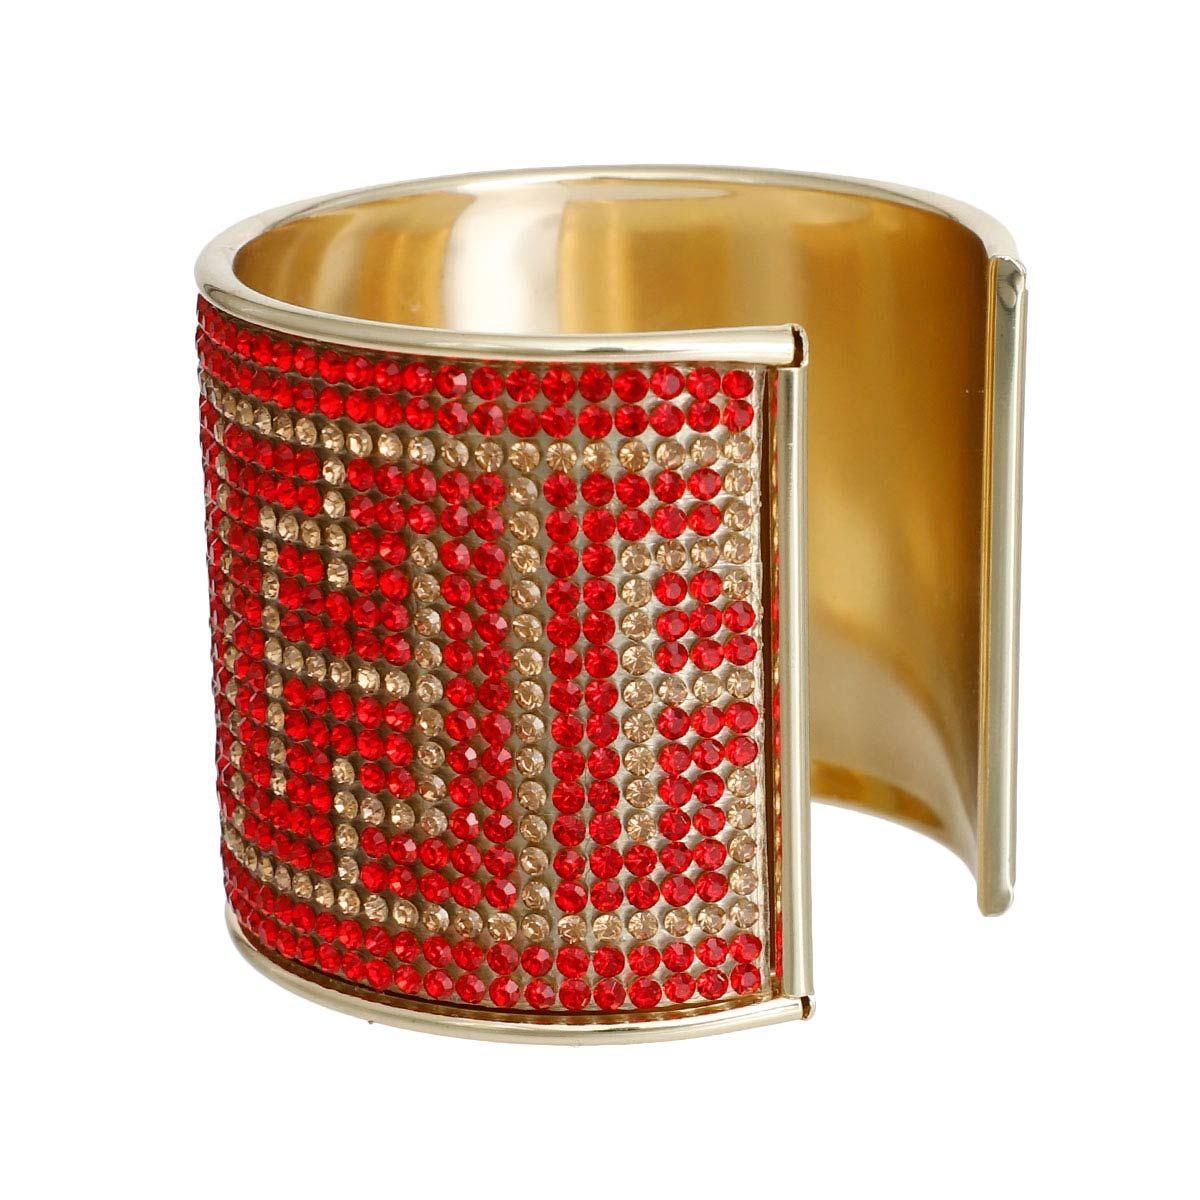 Women's Red Cuff Bracelet Little Extras That Make Your Outfits Pop